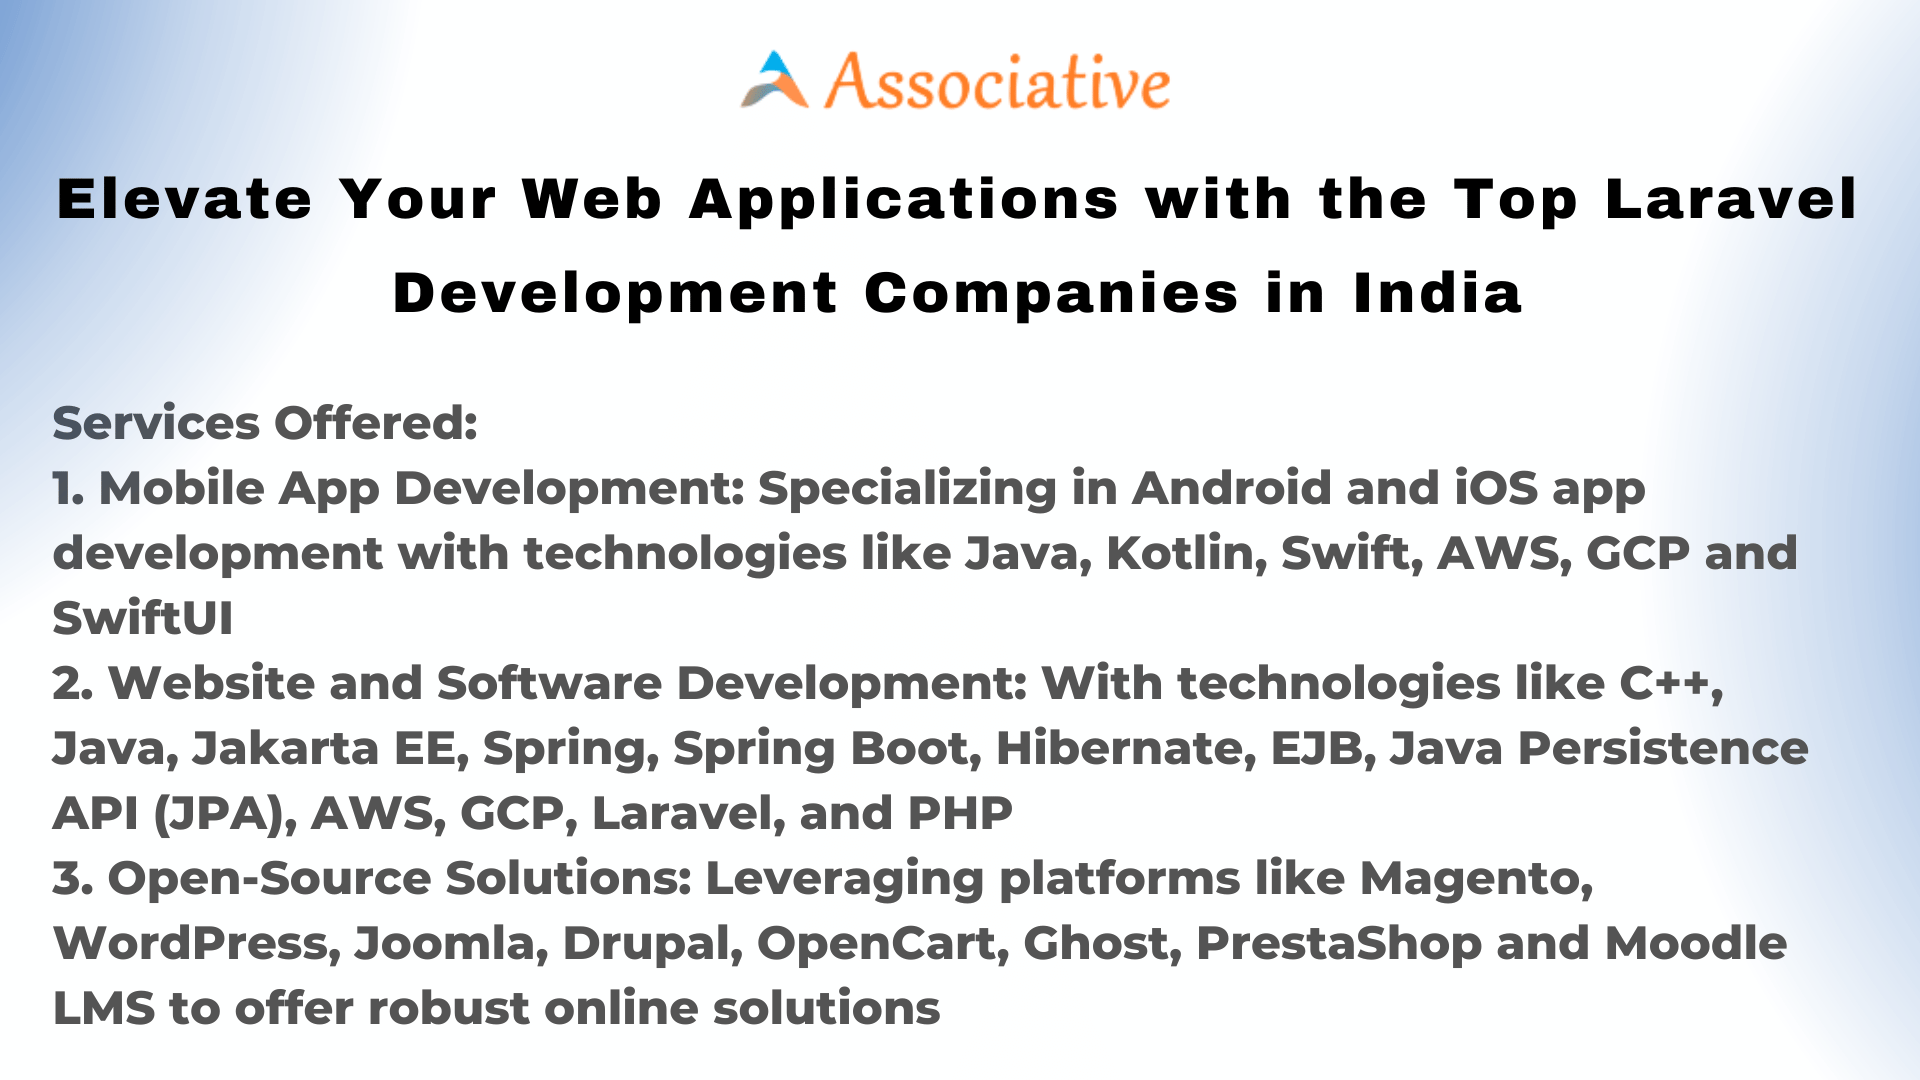 Elevate Your Web Applications with the Top Laravel Development Companies in India